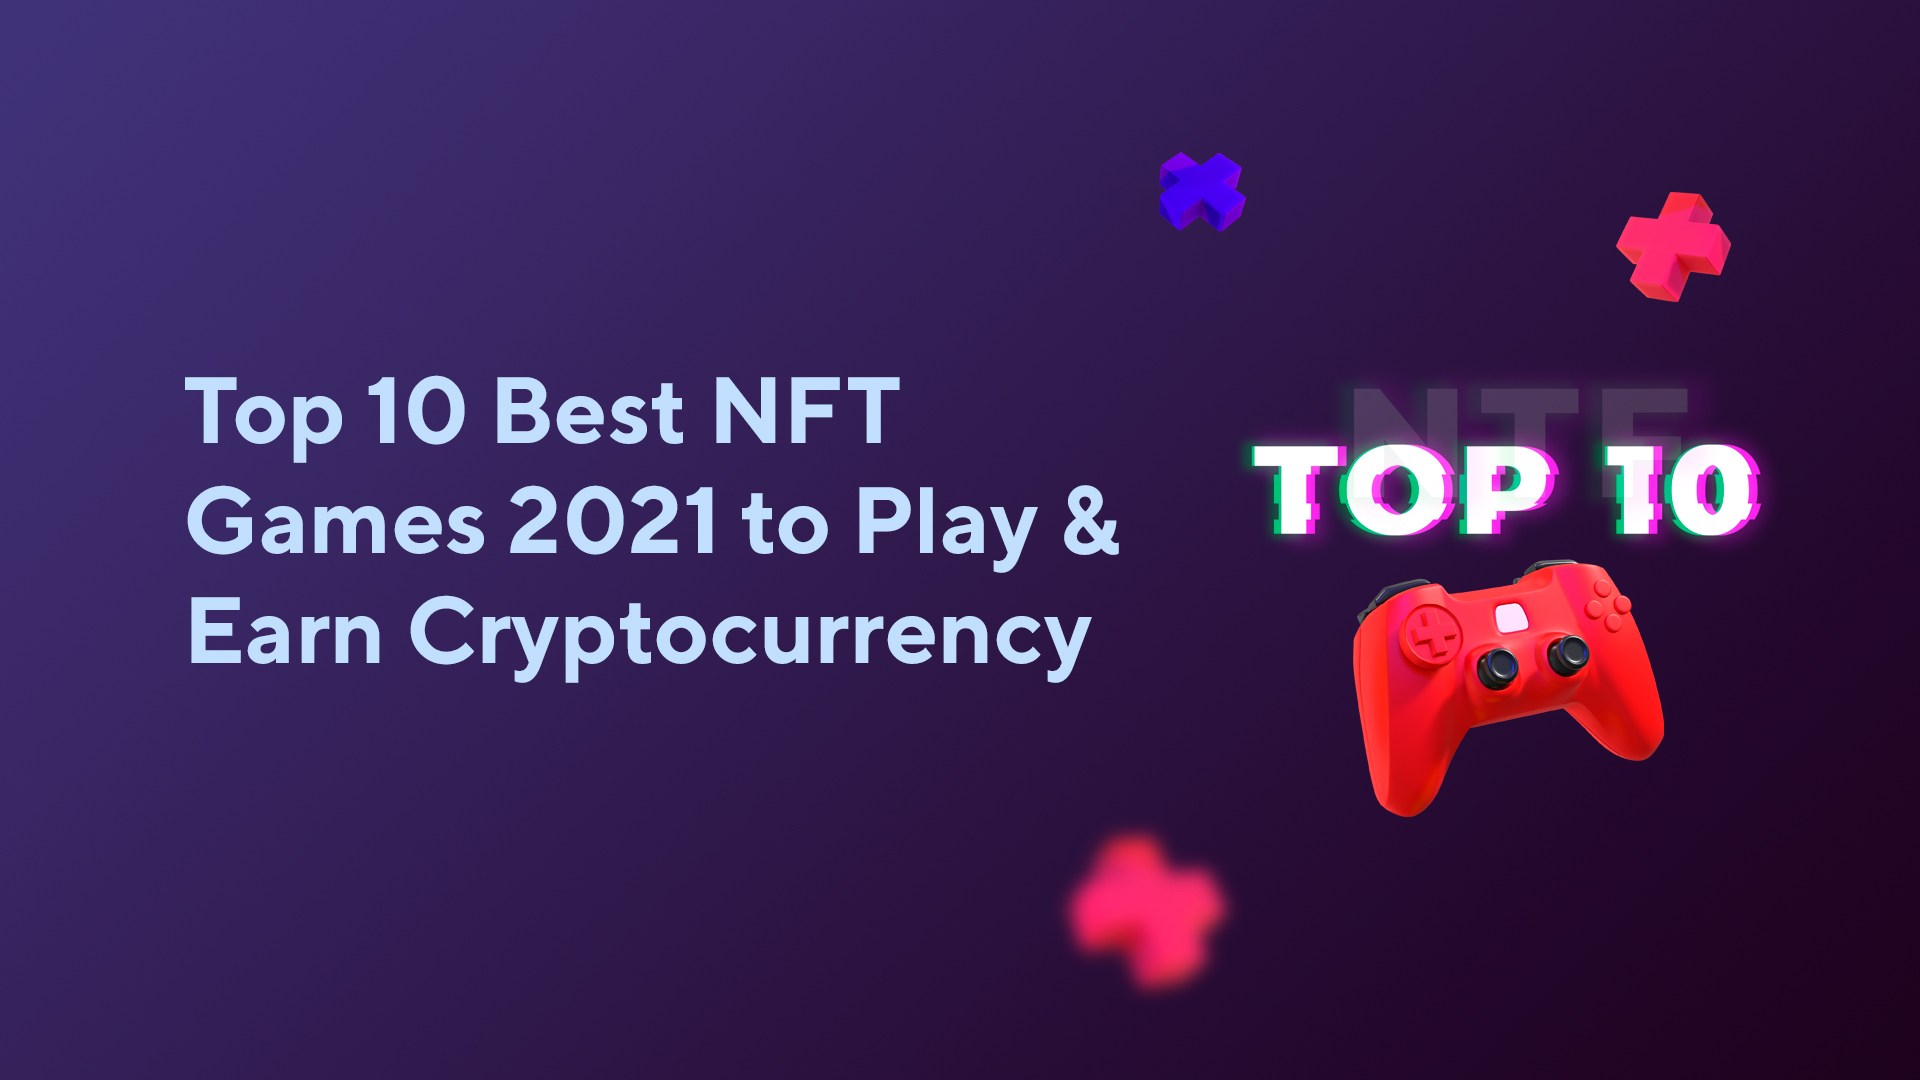 Top 10 Best NFT Games 2022 to Play & Earn Cryptocurrency